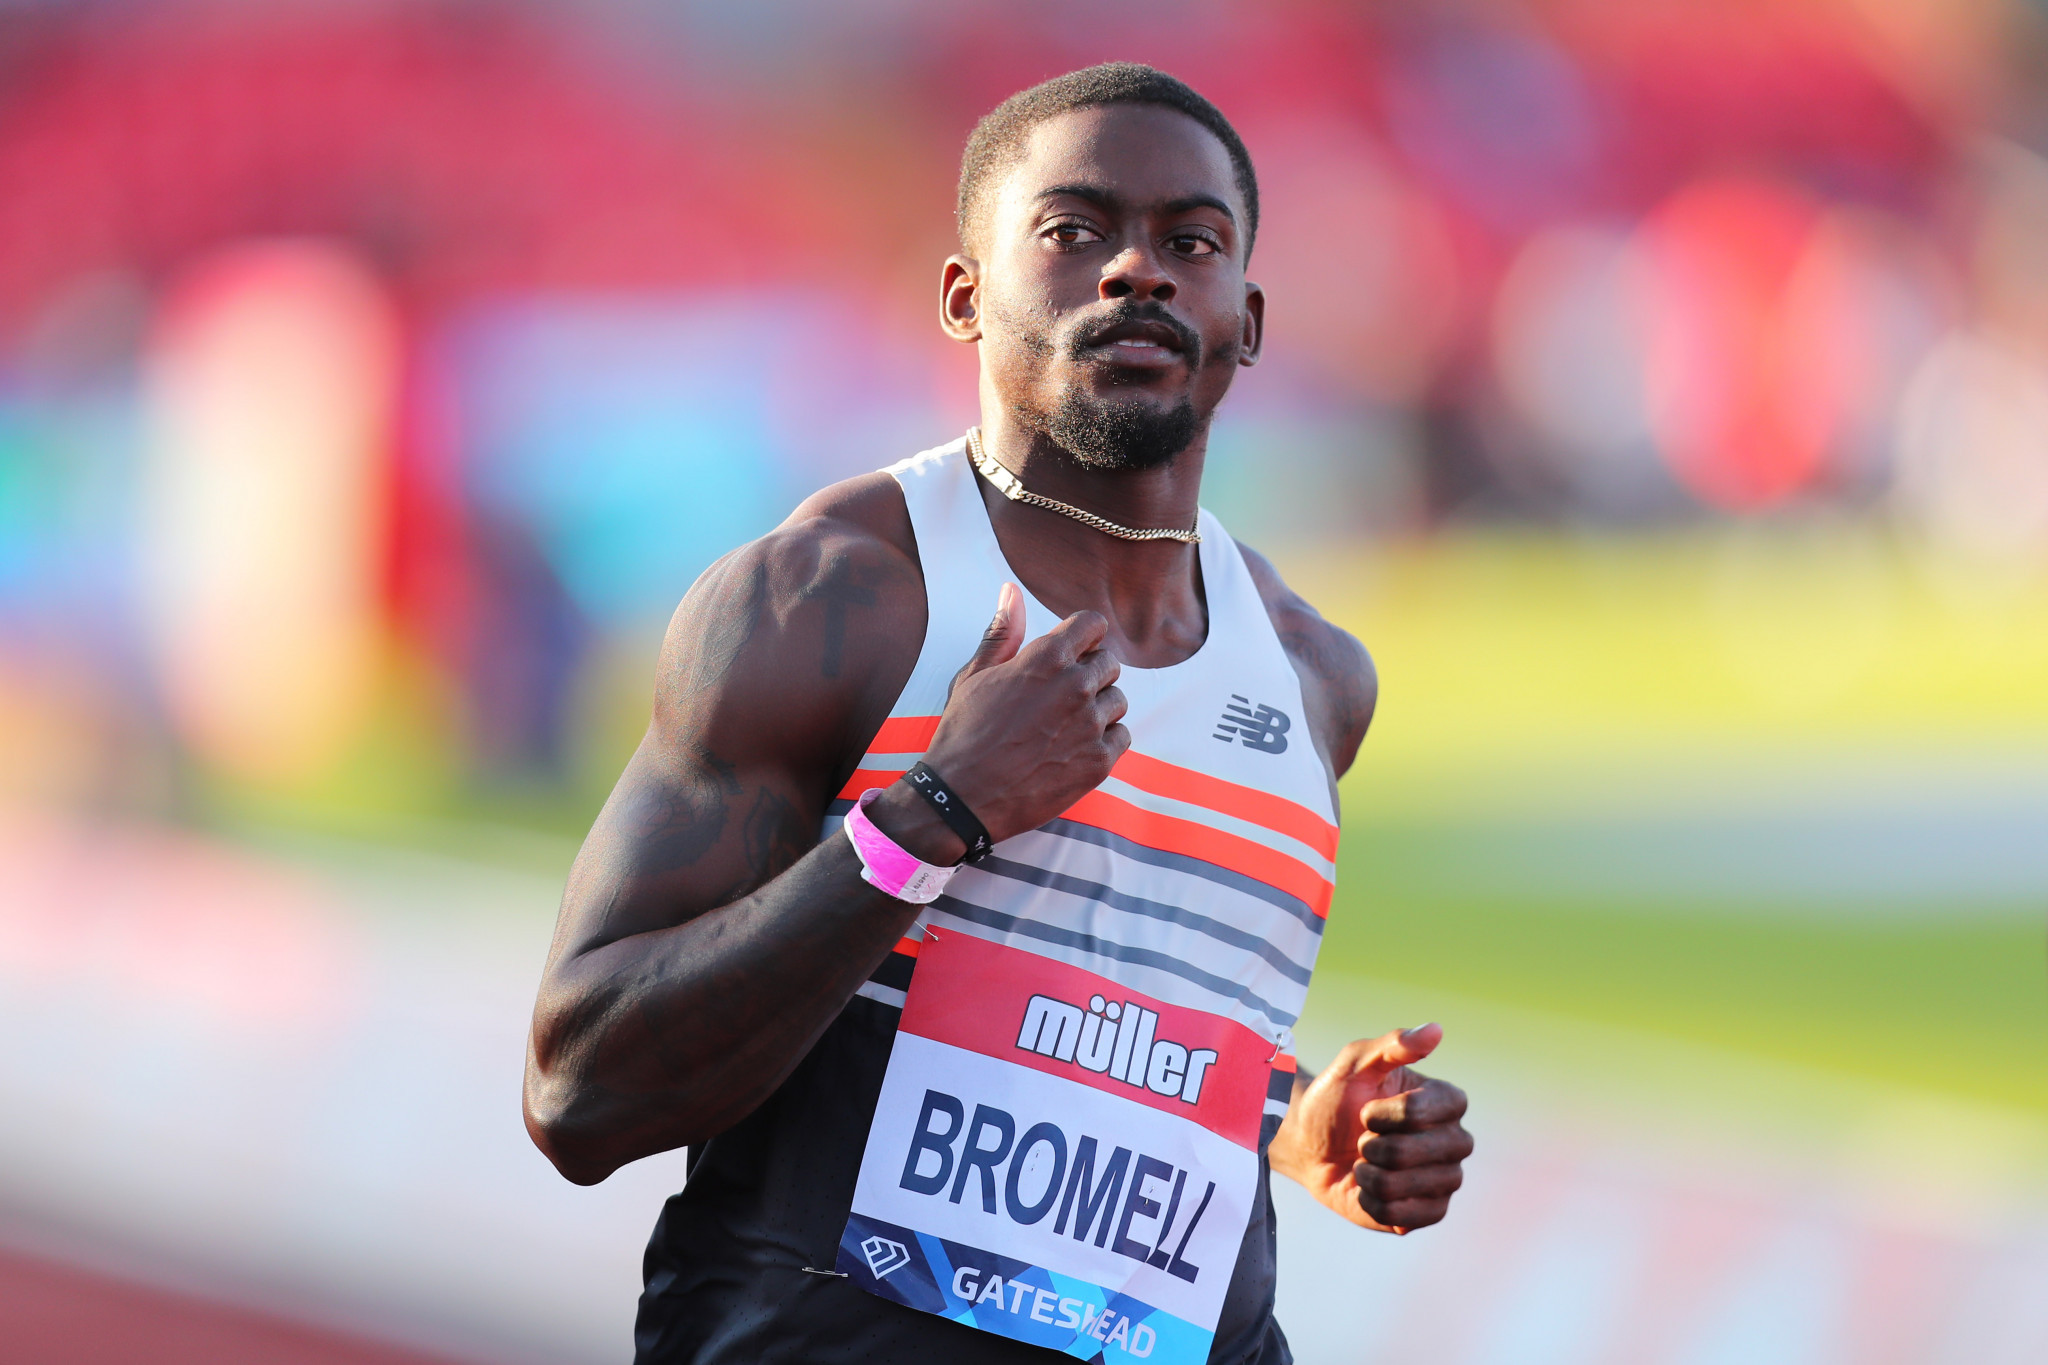 Bromell looks the part with 100m victory at Gateshead Diamond League meeting